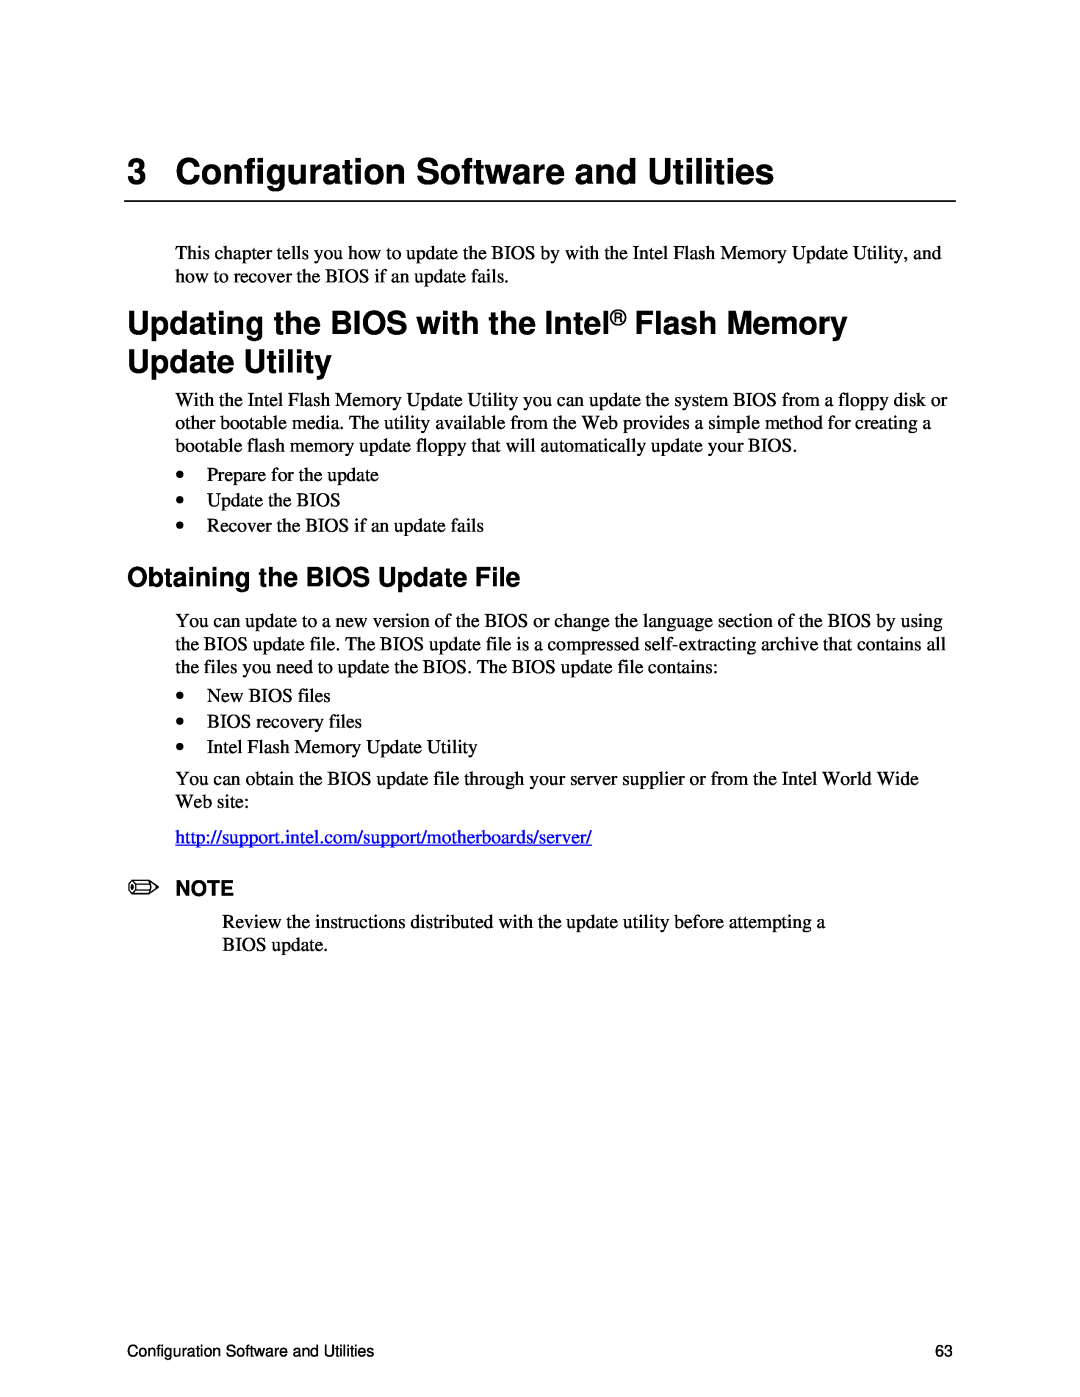 Intel S875WP1-E manual Configuration Software and Utilities, Updating the BIOS with the Intel Flash Memory Update Utility 